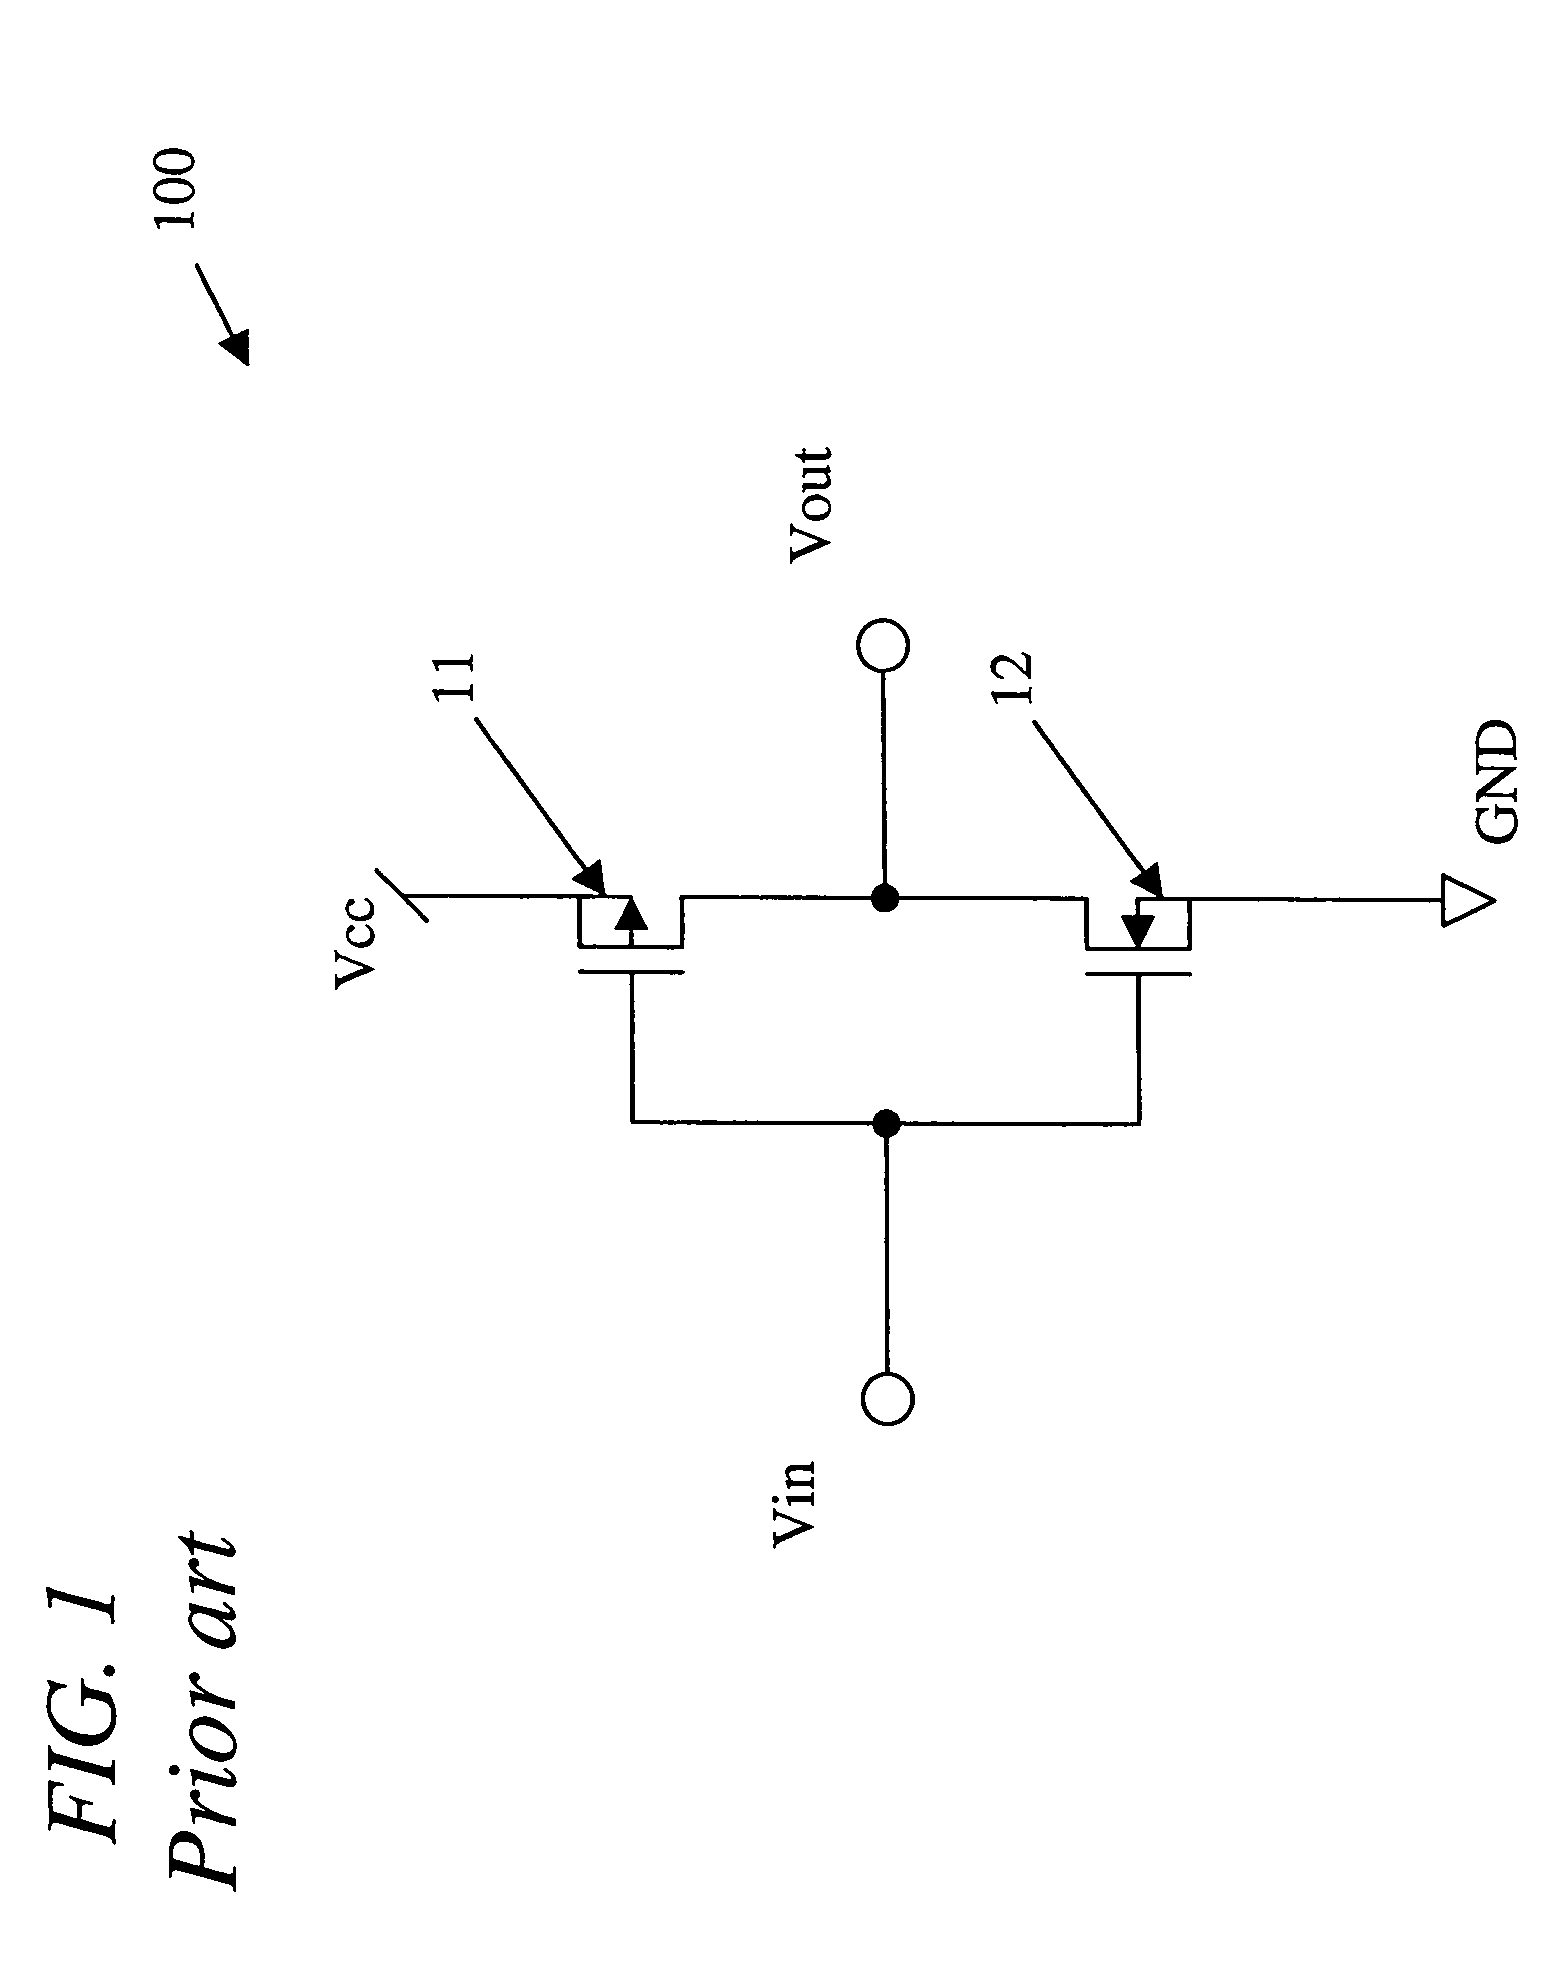 Standby current reduction over a process window with a trimmable well bias